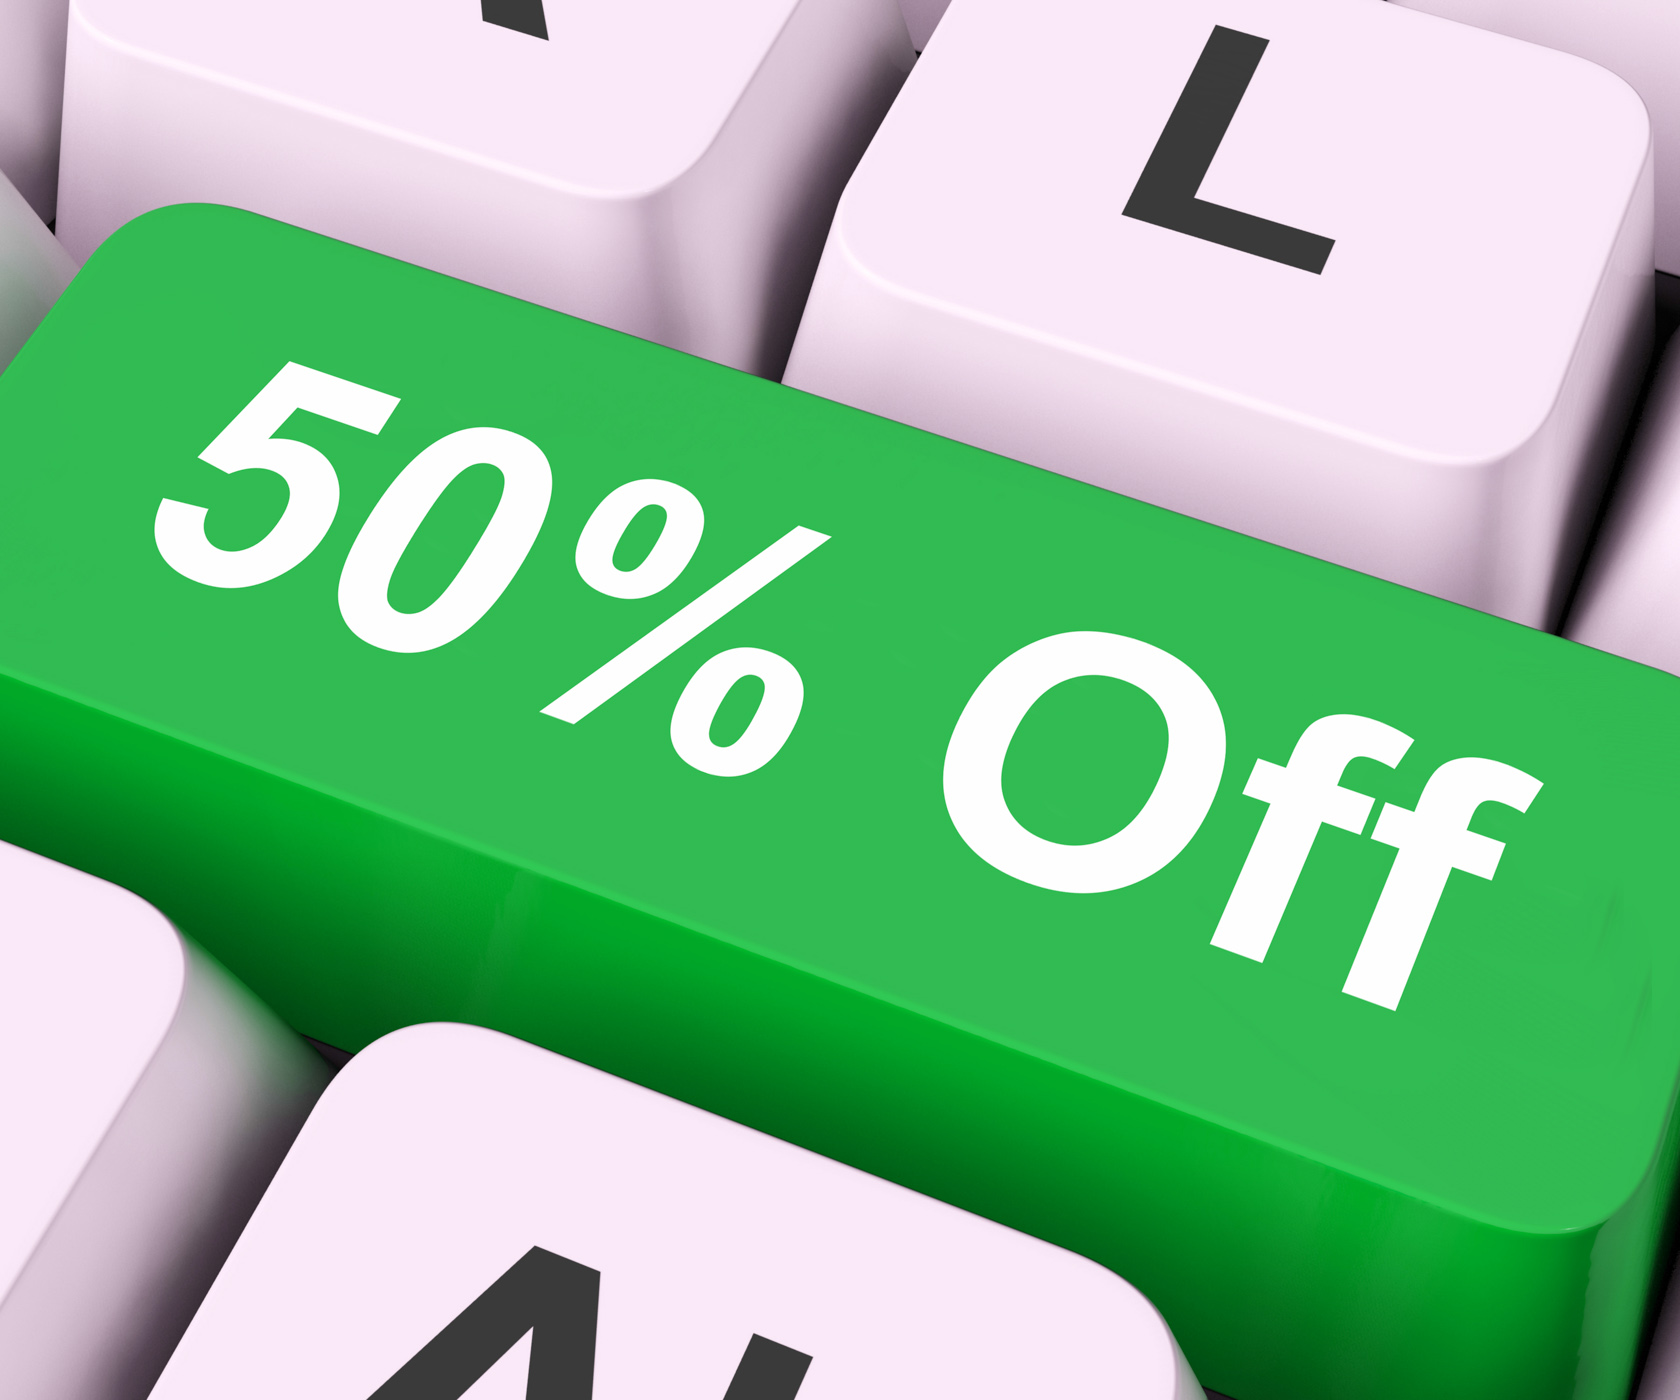 Fifty percent off key means discount or sale photo